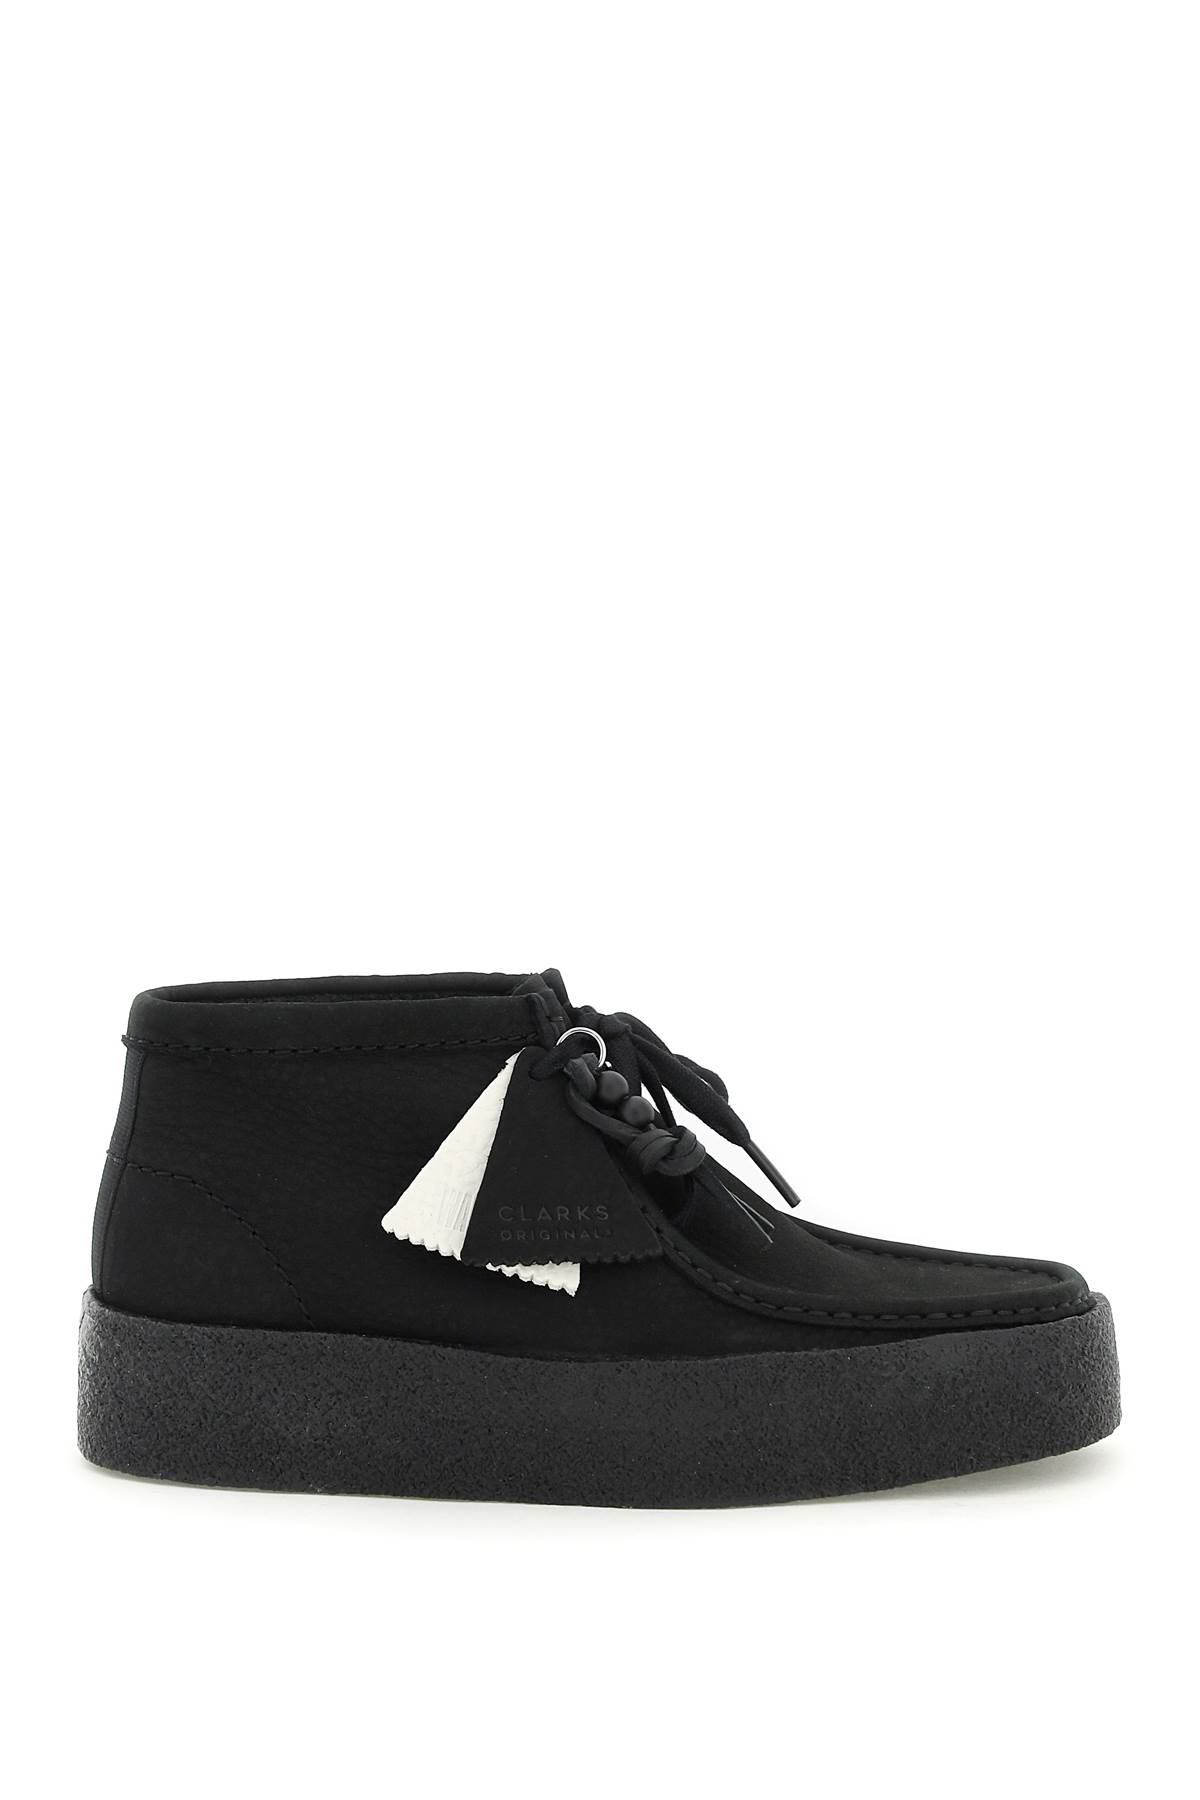 CLARKS WALLABEE CUP HI-TOP LACE-UP SHOES